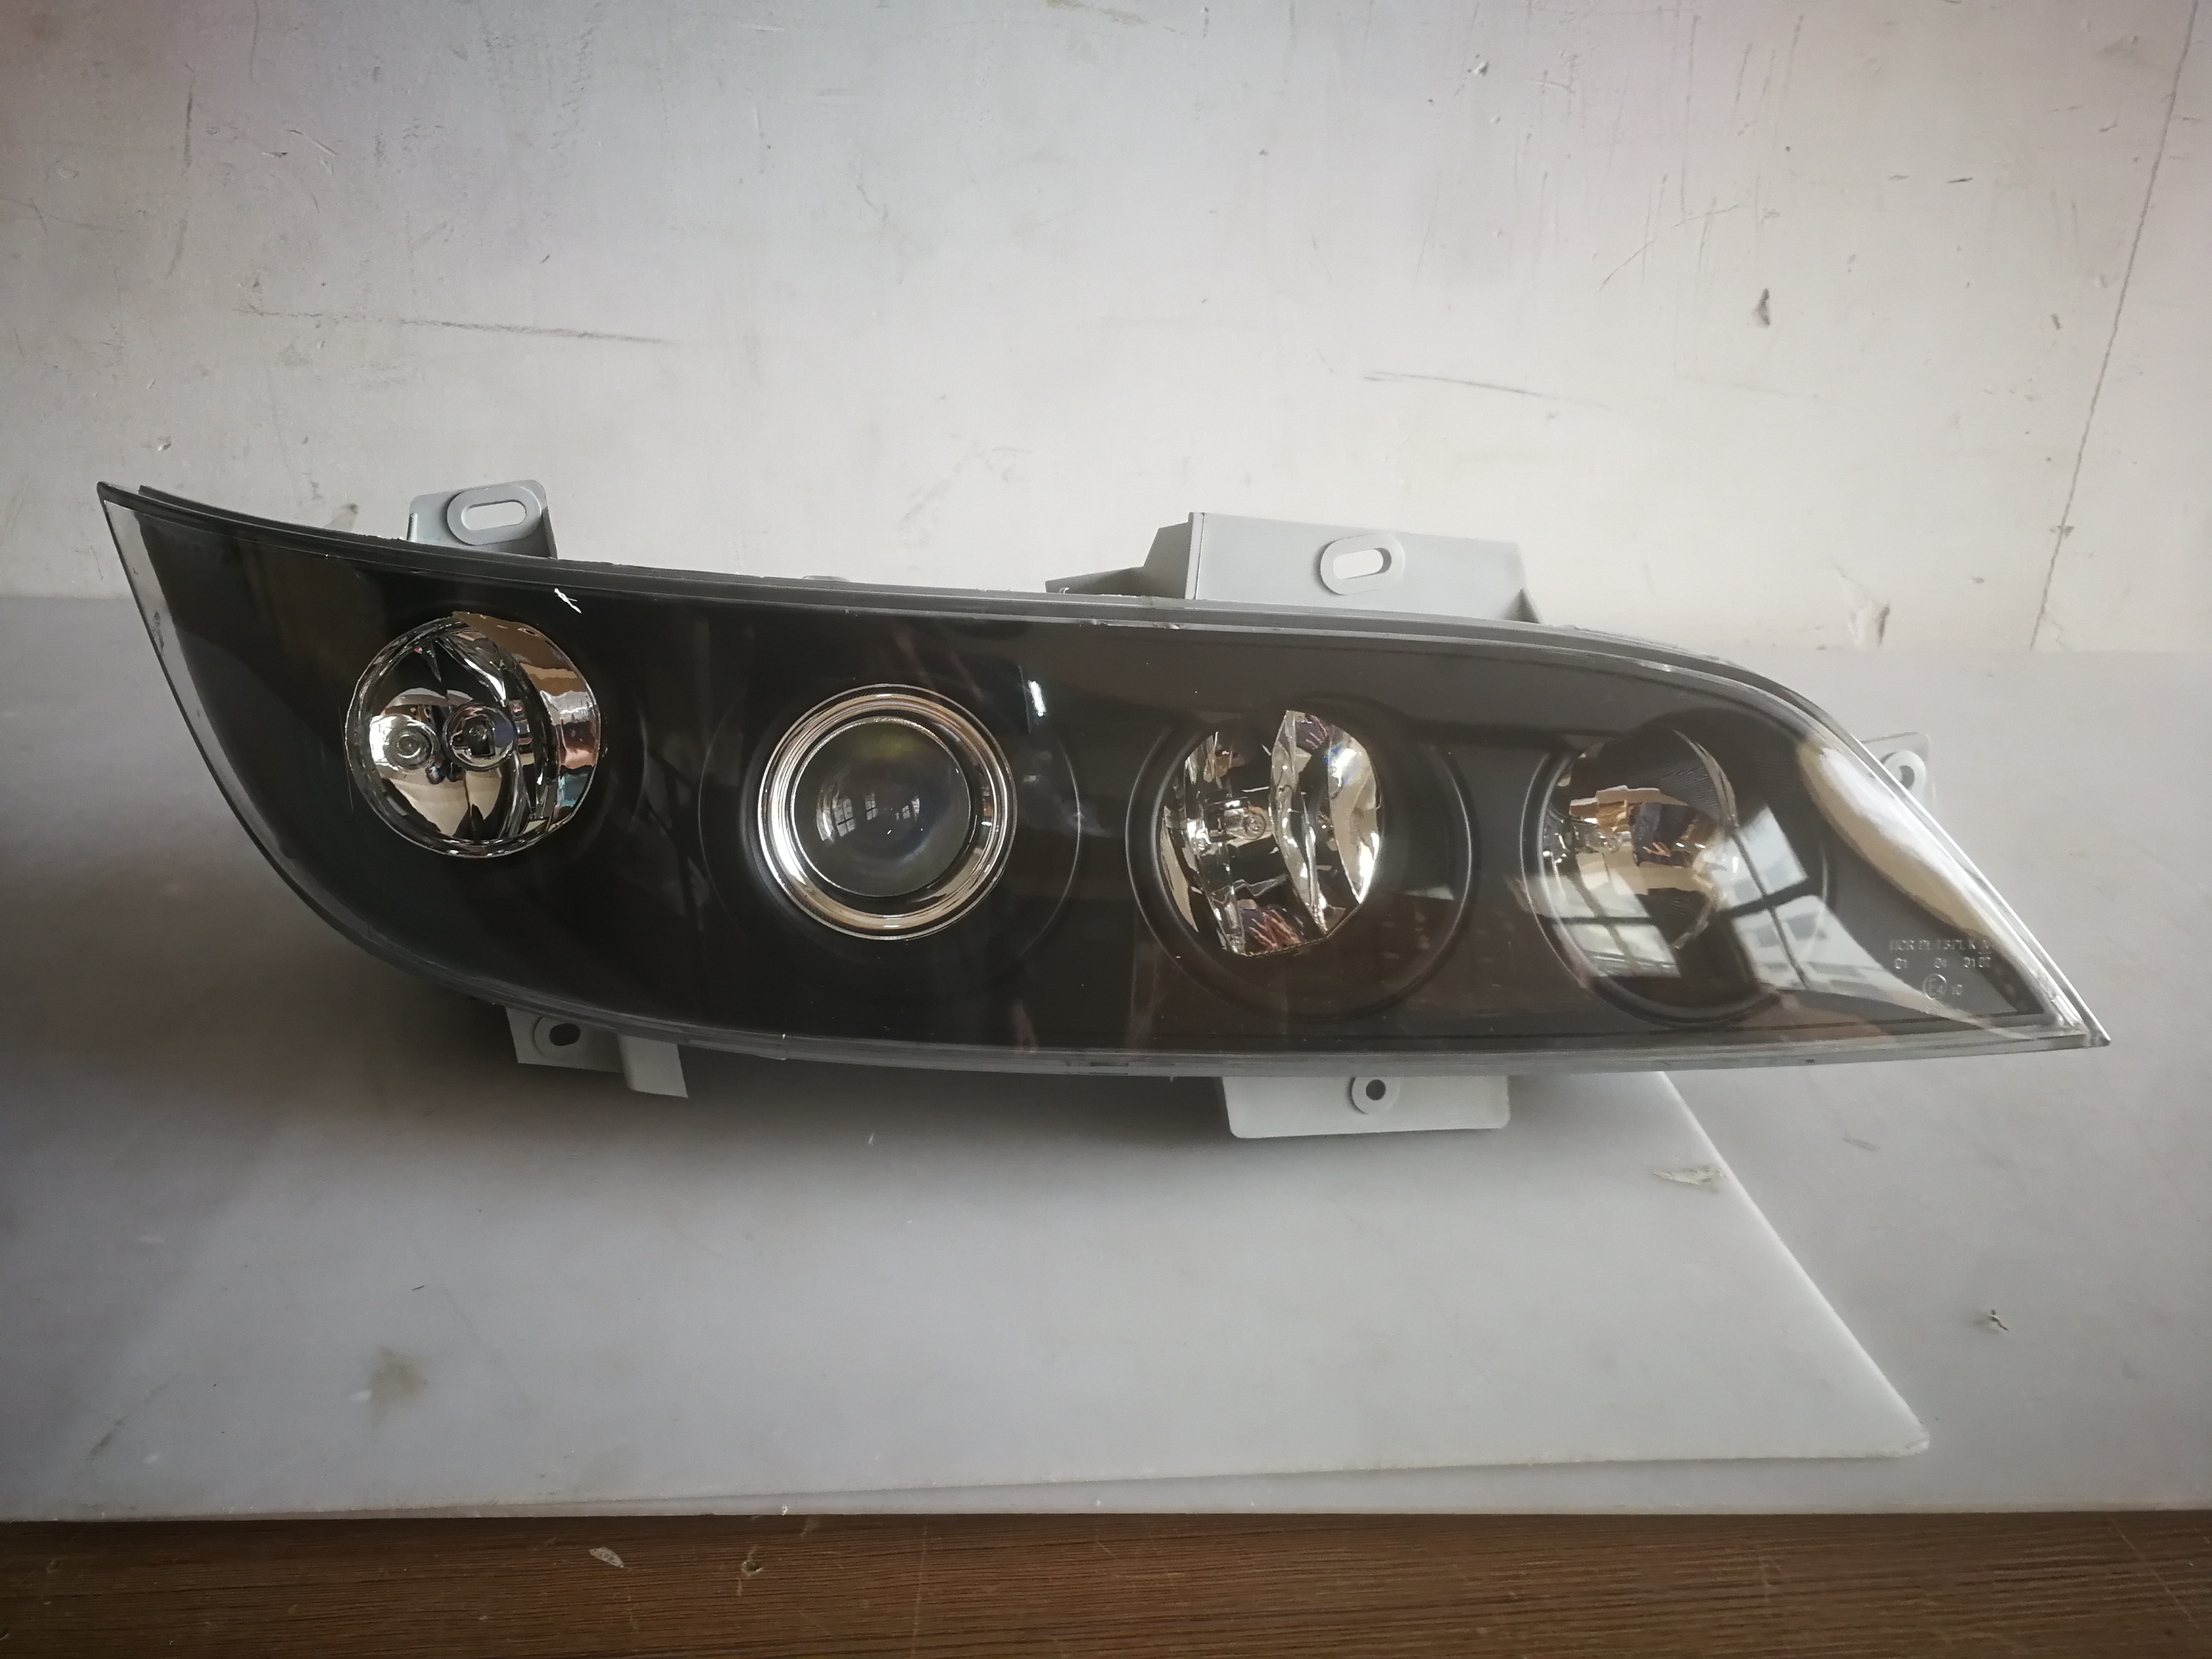 HC-B-1389-2 Neoplan Bus Parts front light head lamp high quality